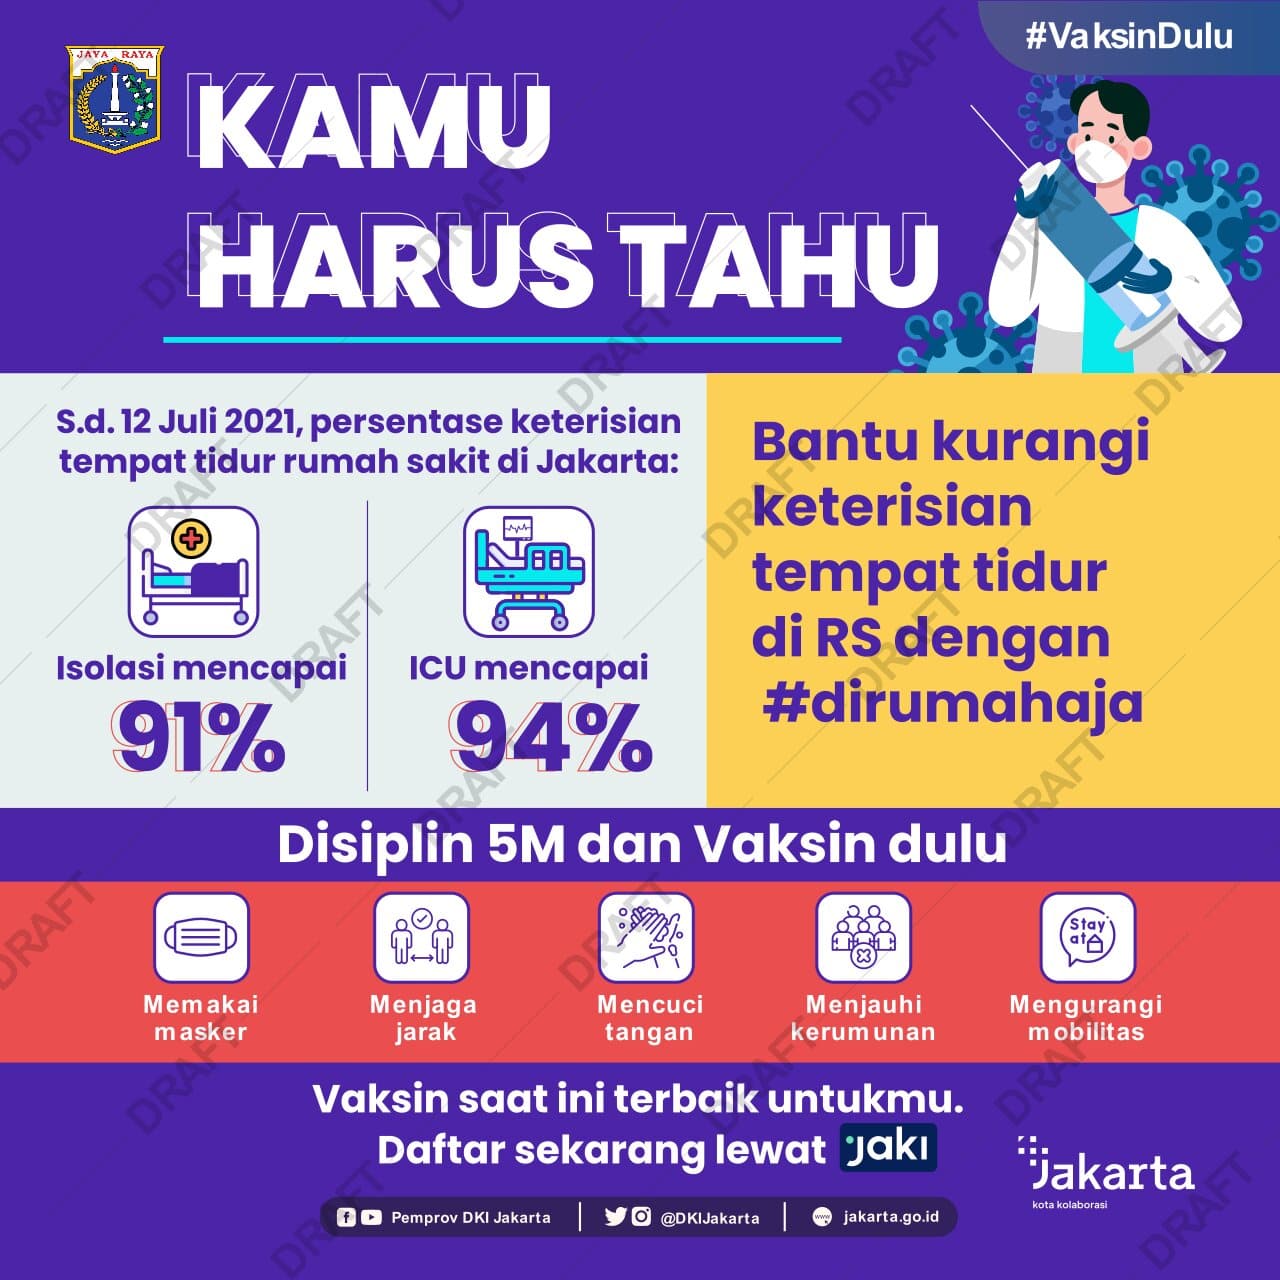 You Must Know the Occupancy of Hospital Beds in Jakarta